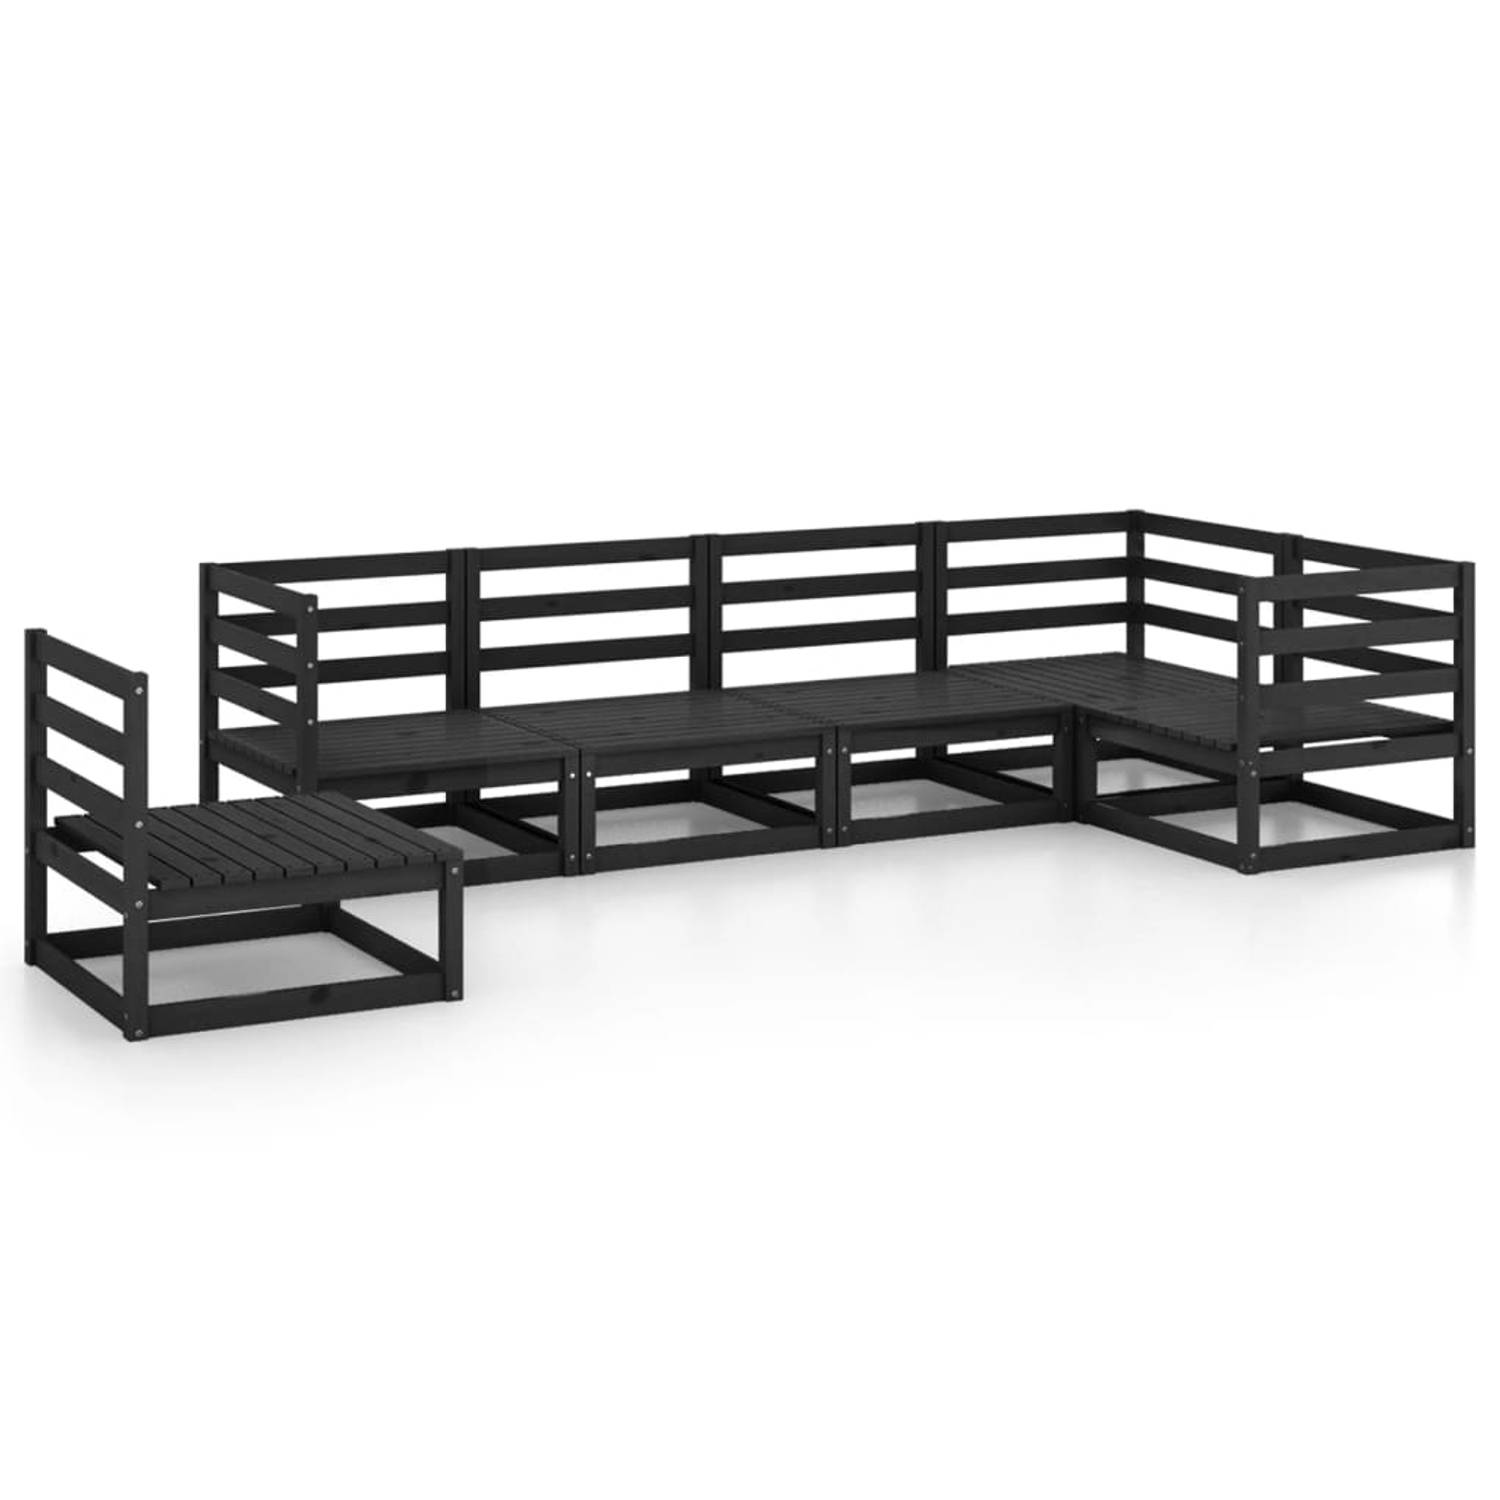 The Living Store Tuinset - Grenenhout - Zwart - 70 x 70 x 67 cm - Modulaire loungeset